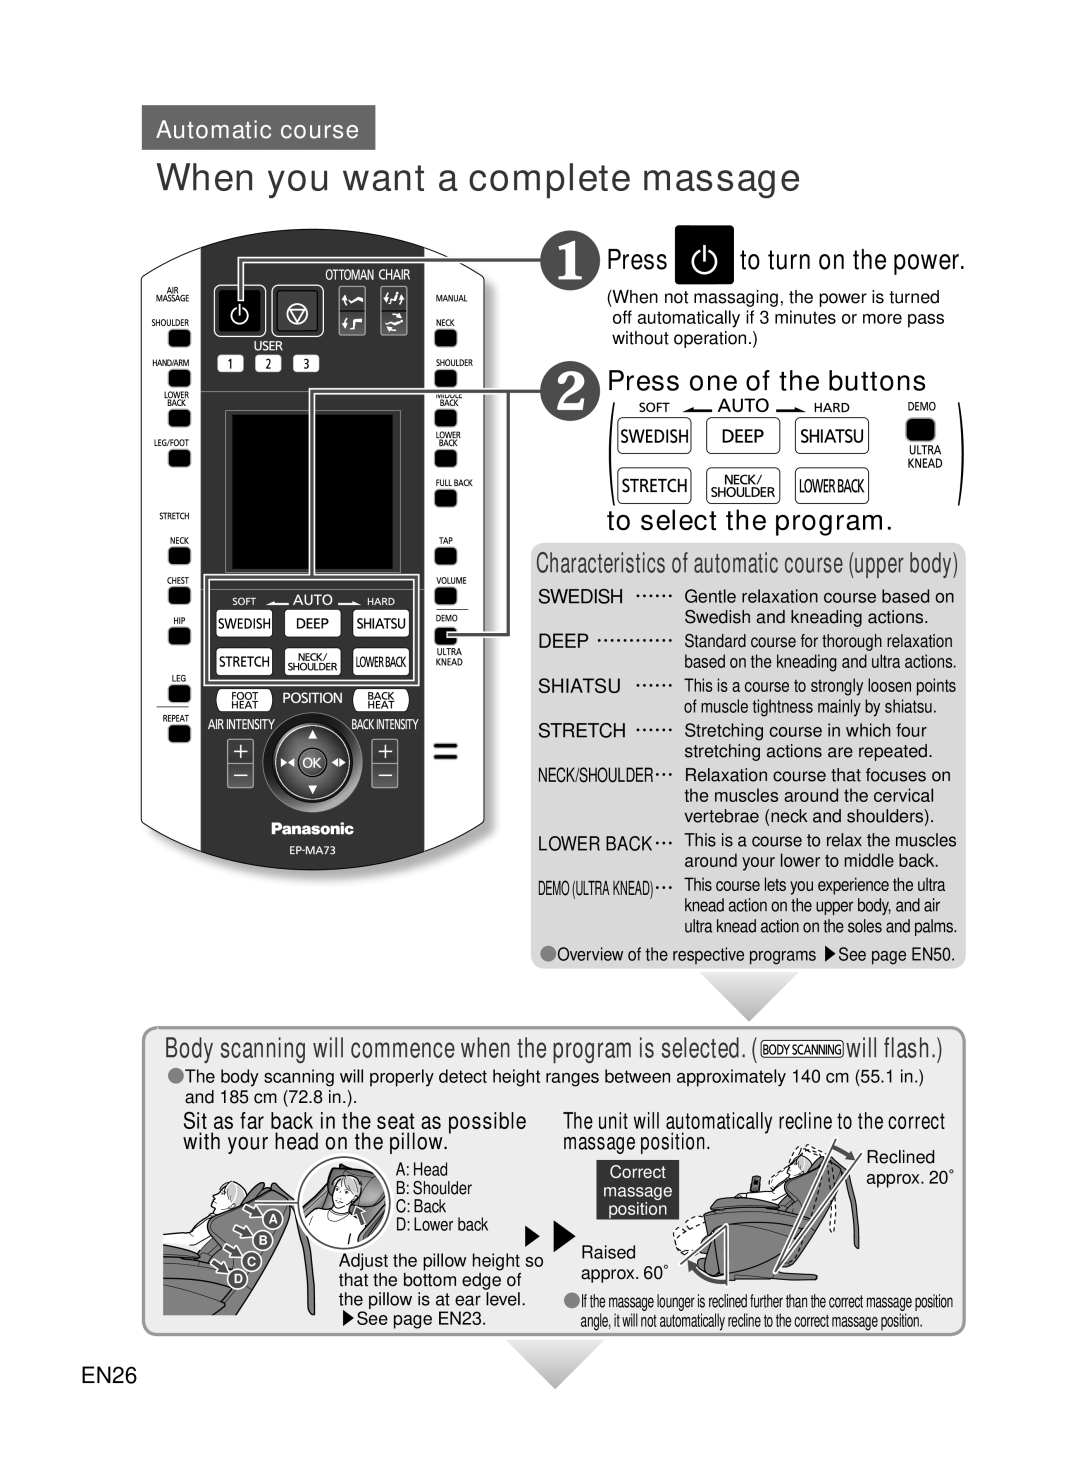 Panasonic EP-MA73 manual When you want a complete massage, ❶ Press to turn on the power, Press one of the buttons, EN26 